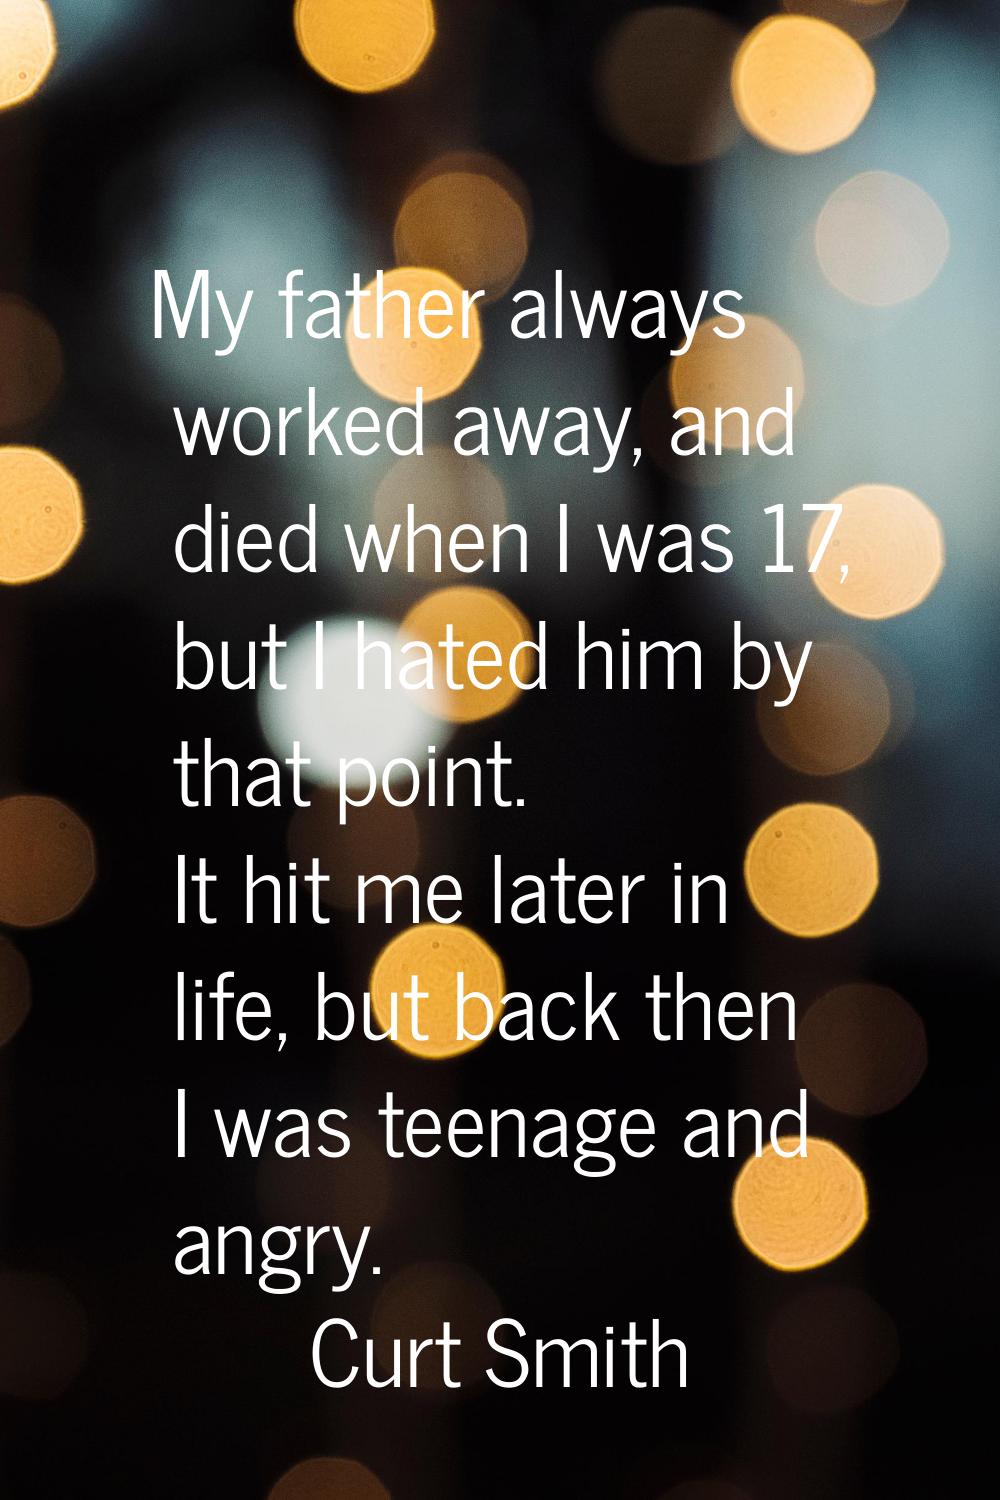 My father always worked away, and died when I was 17, but I hated him by that point. It hit me late